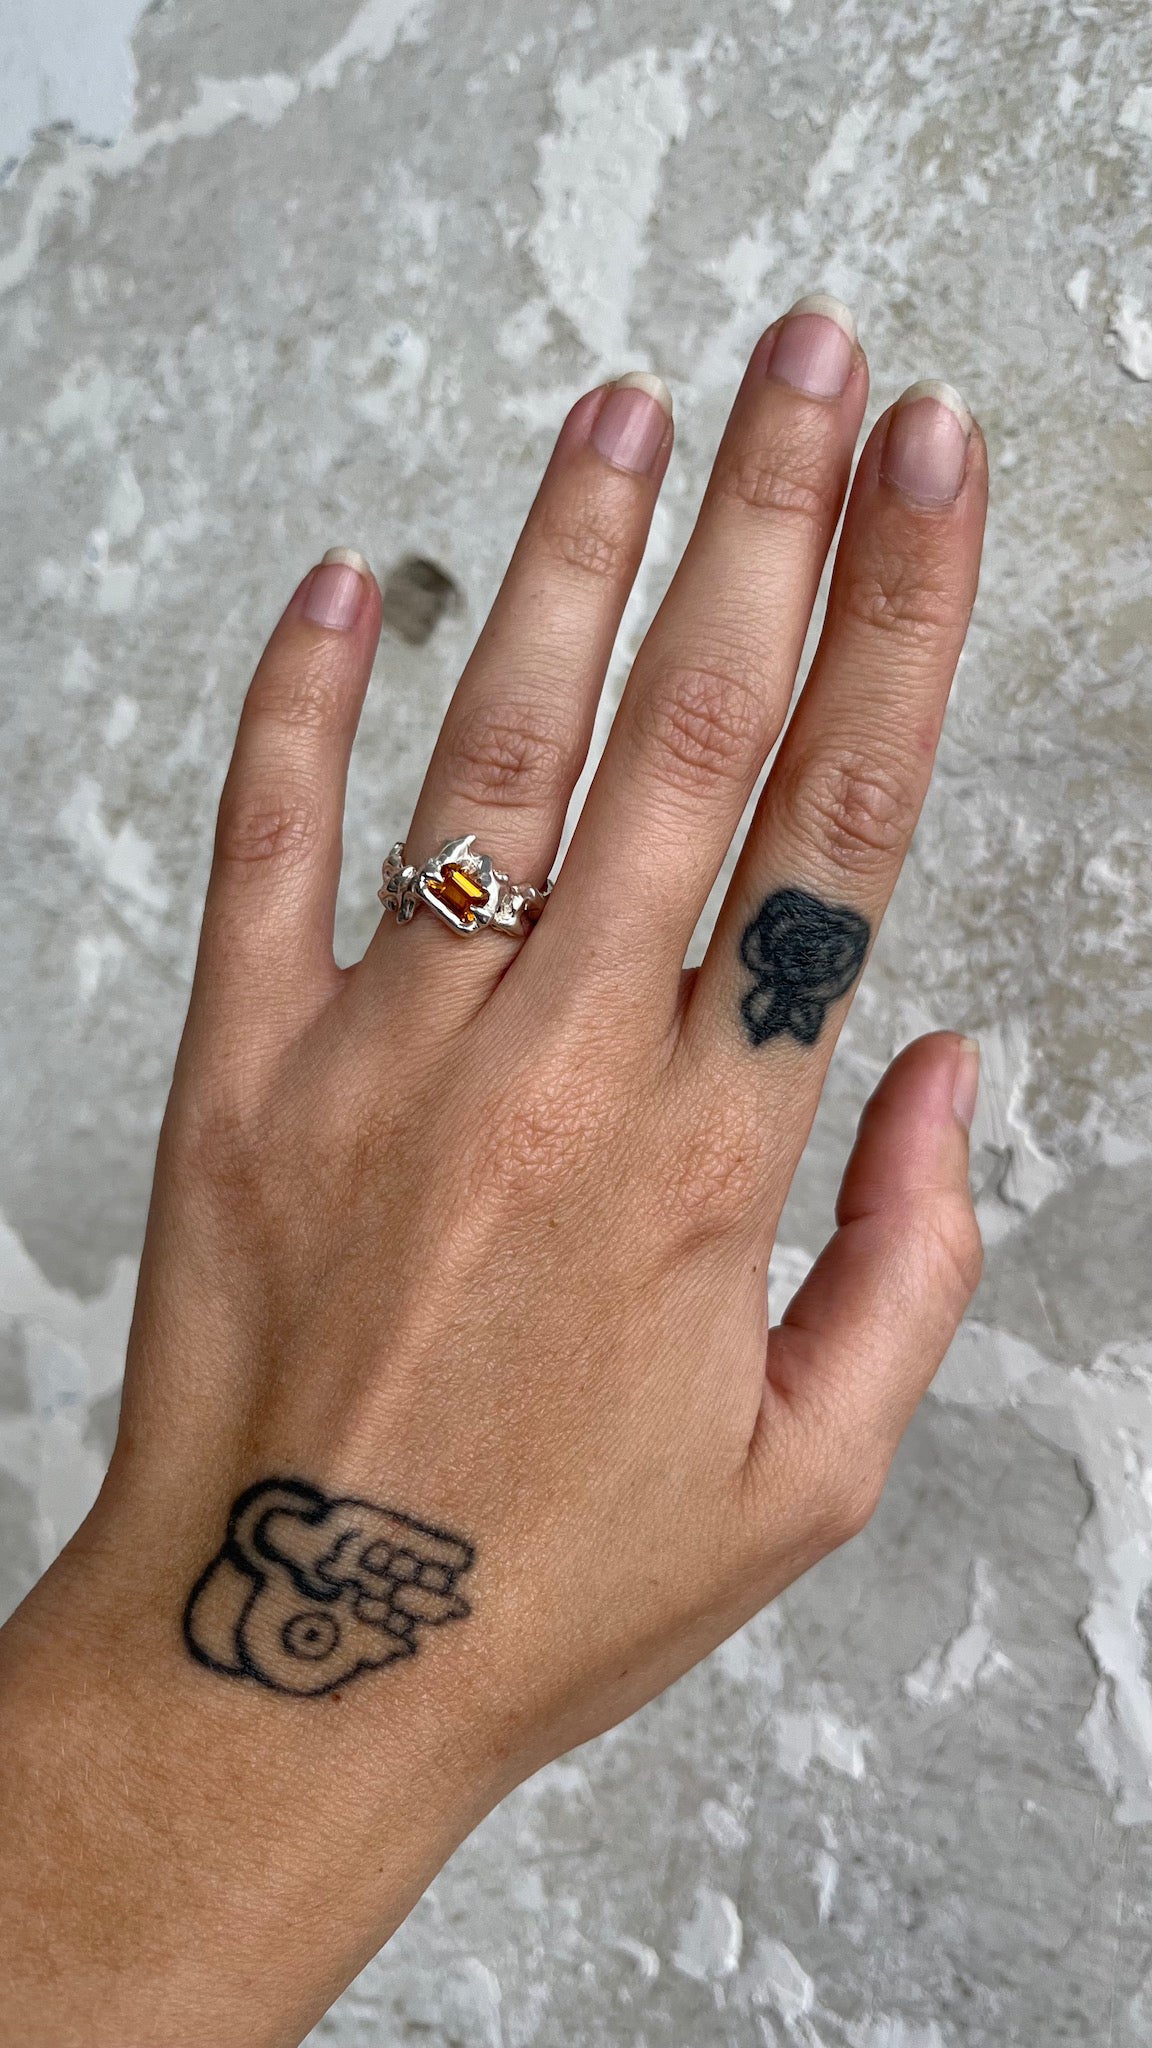 Mini KHAOS sterling silver and Citrine ring I